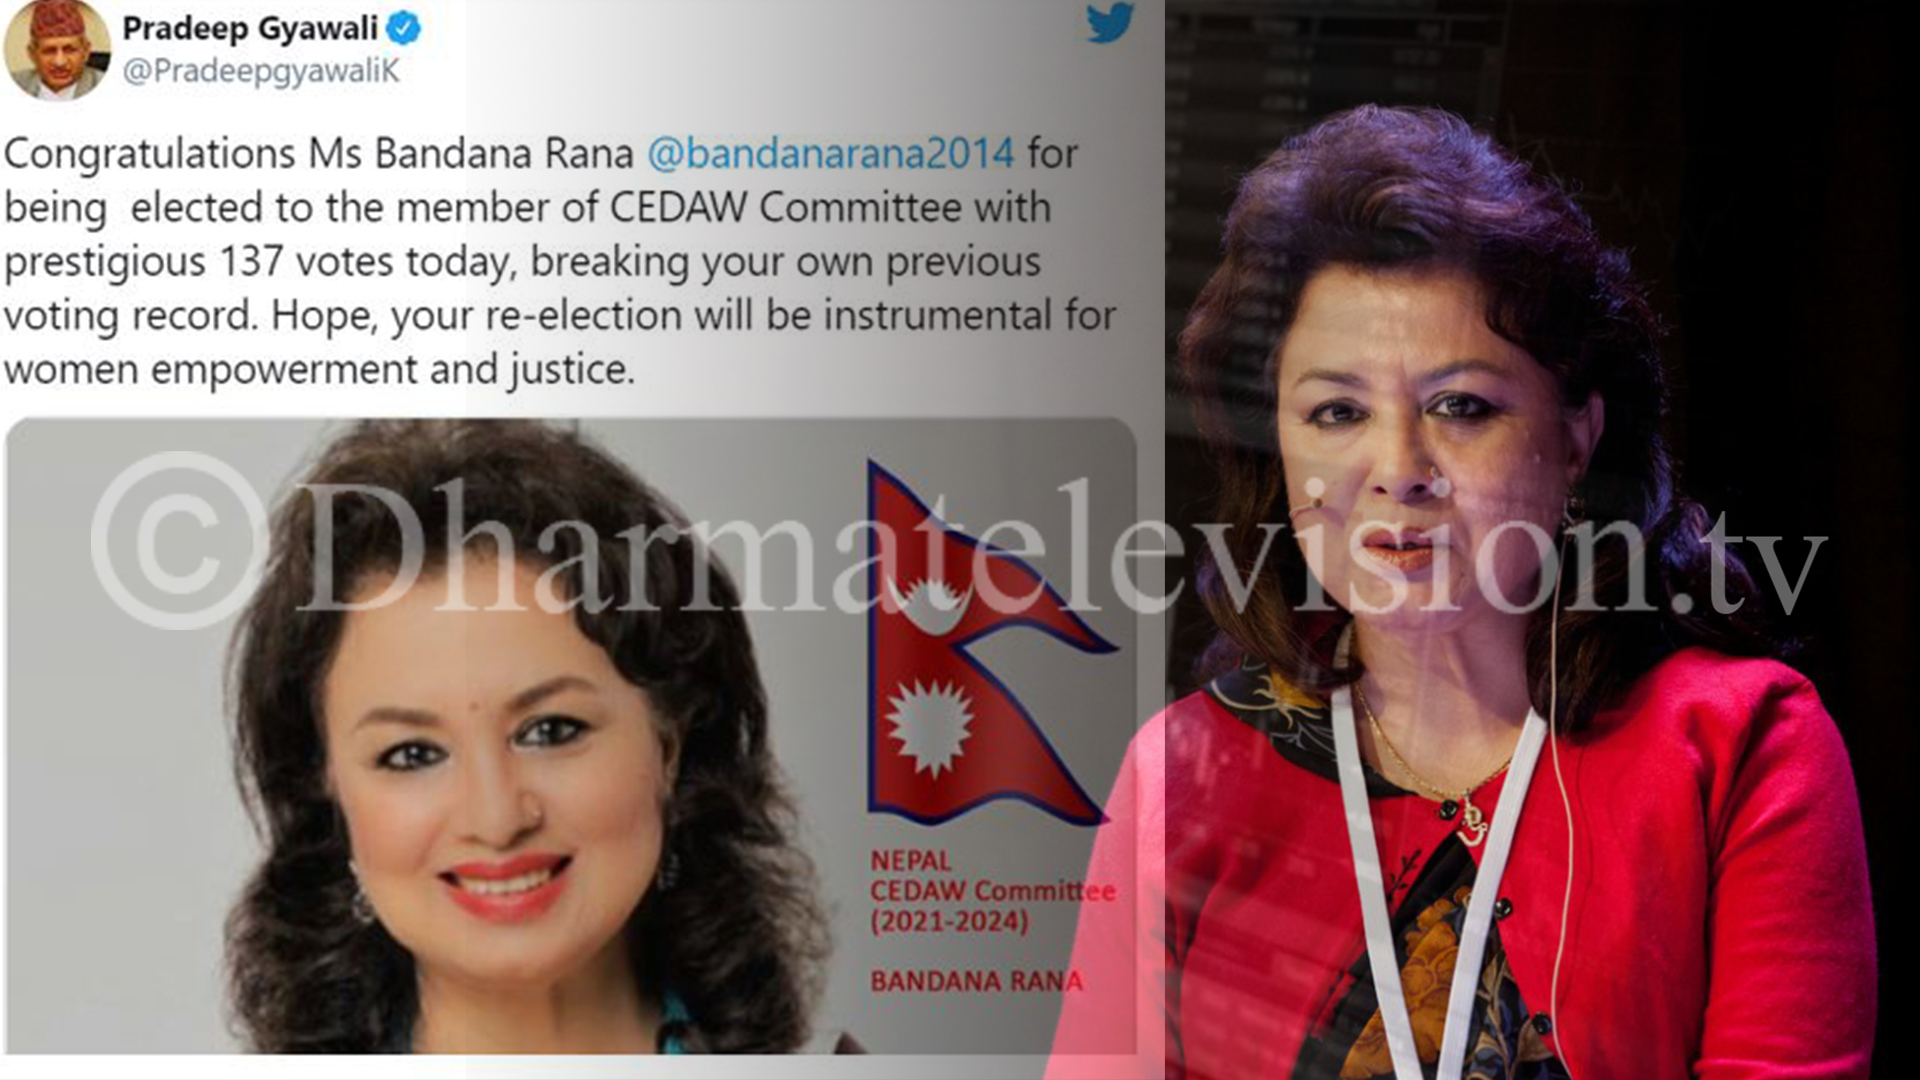 Nepal’s Bandana Rana Re-Elected as member of UN CEDAW Committee